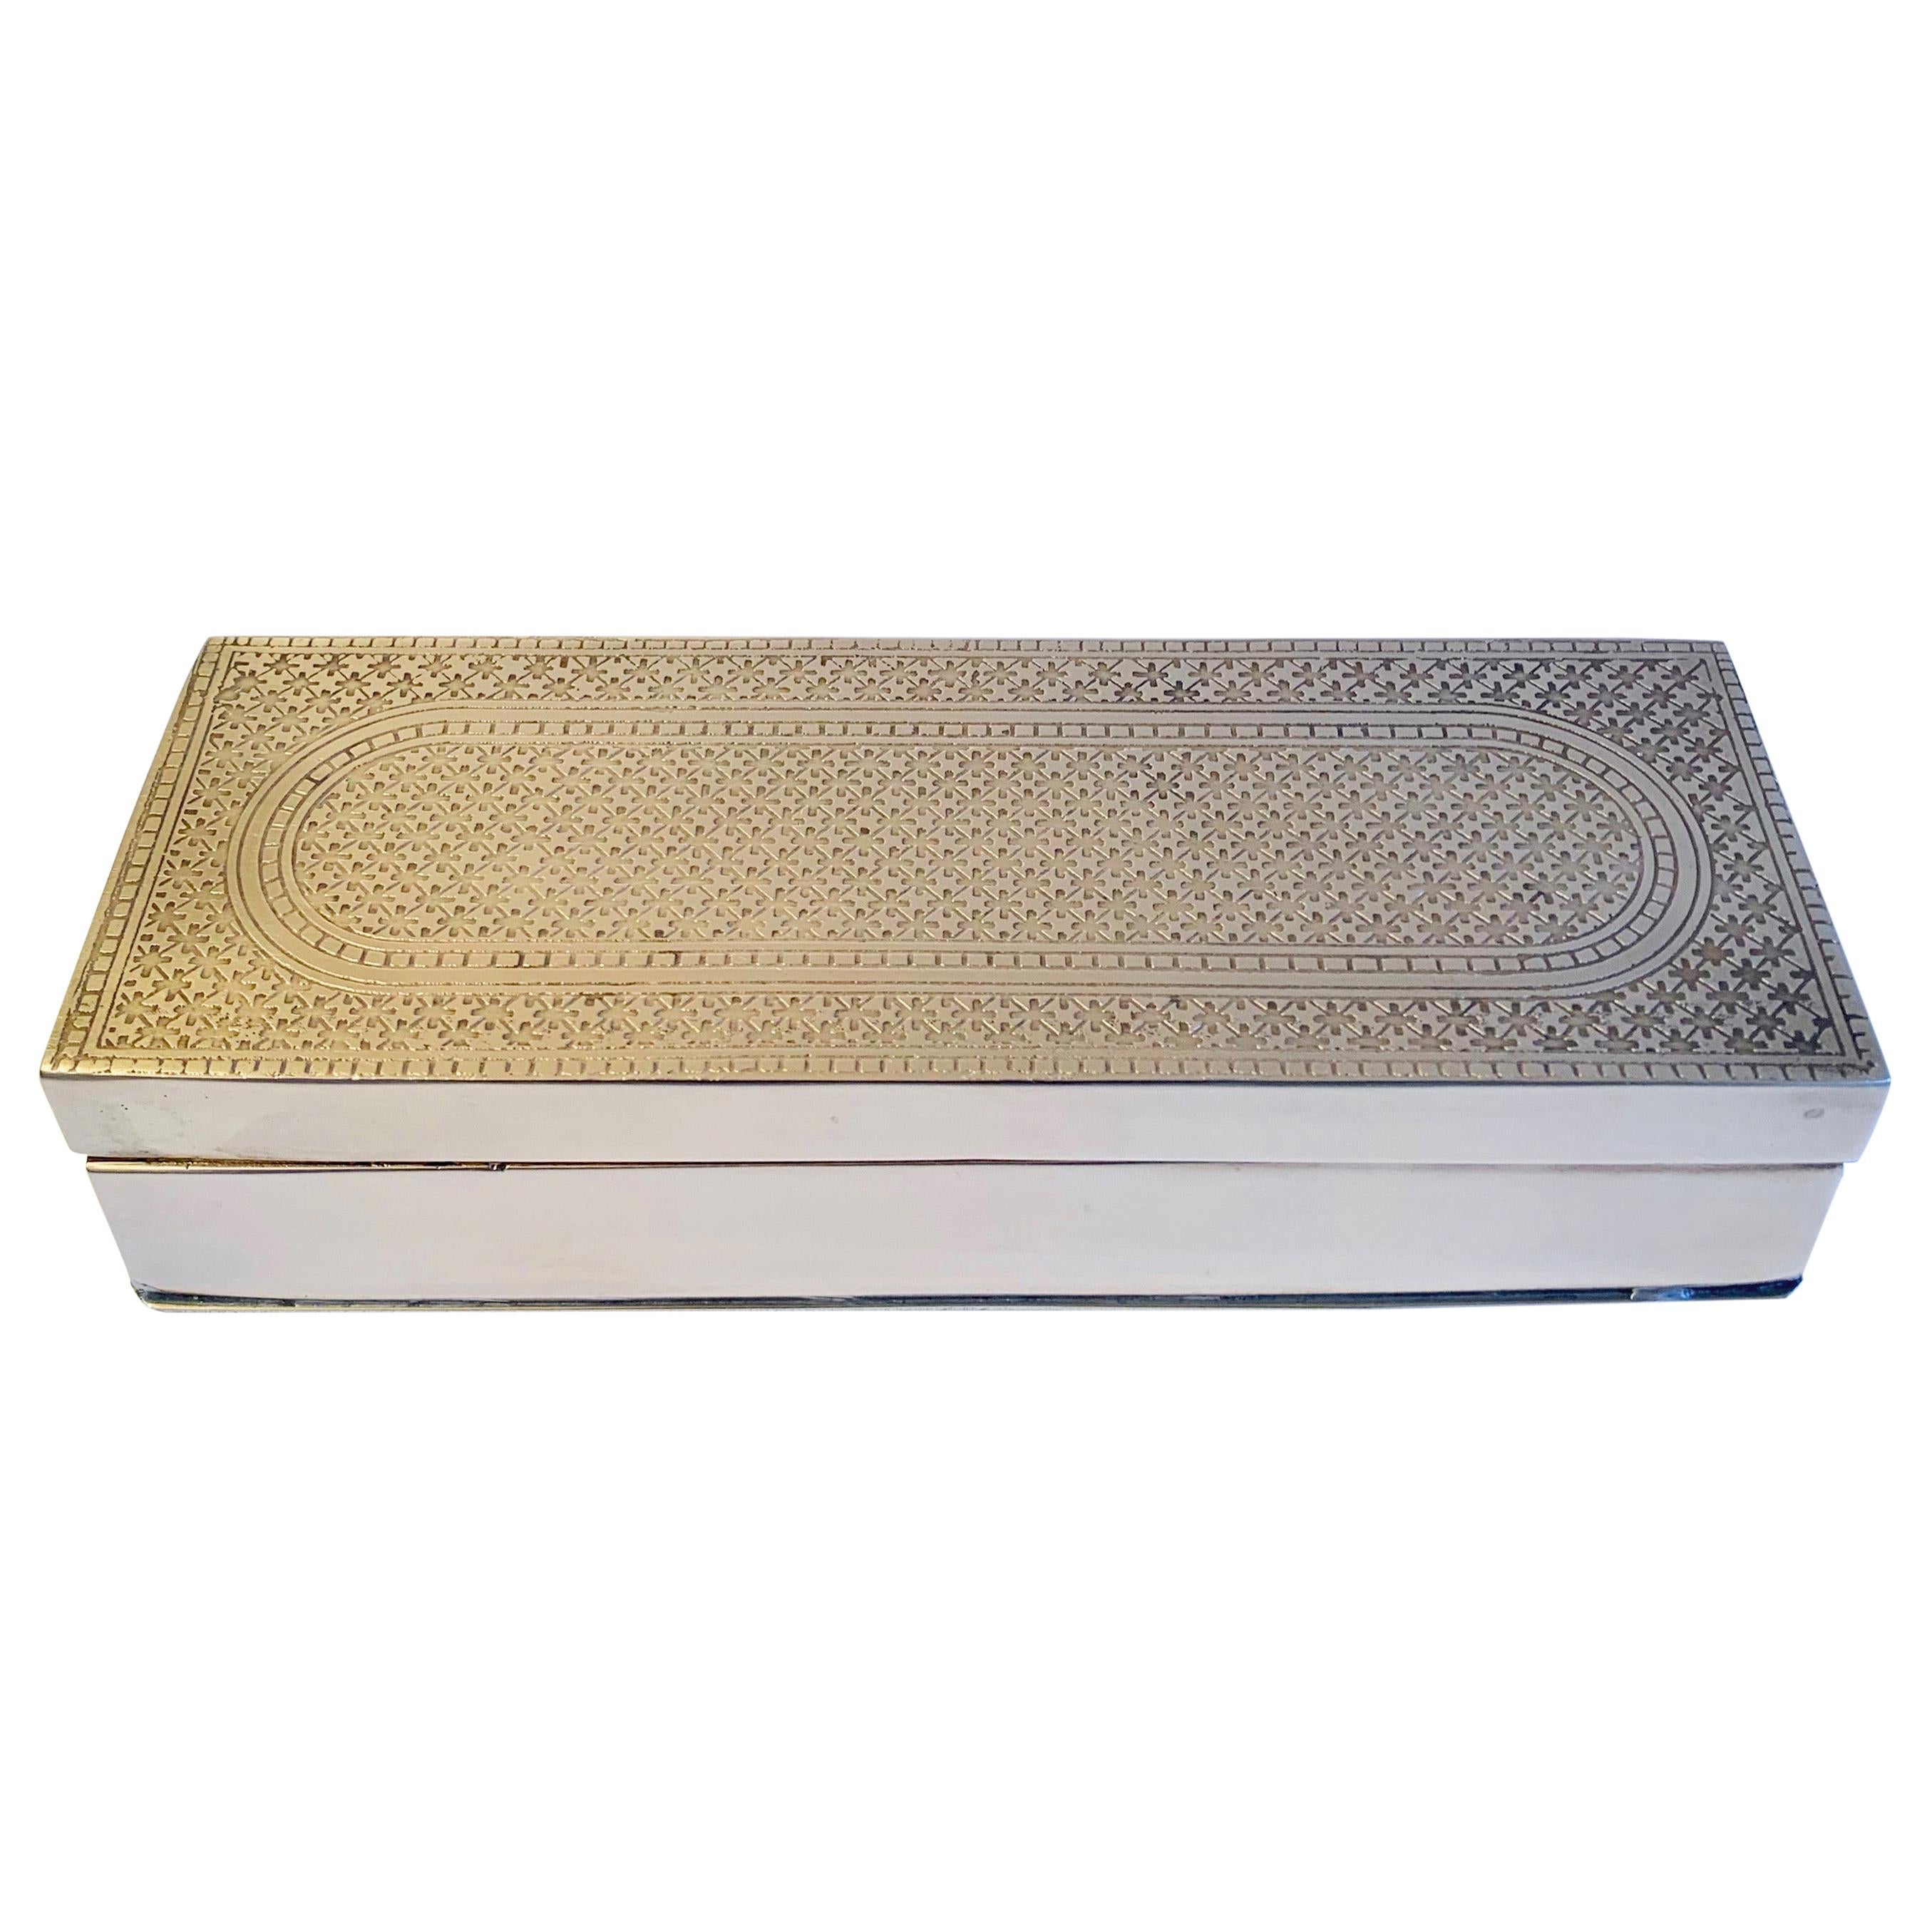 Solid Brass Box with Intricate Design